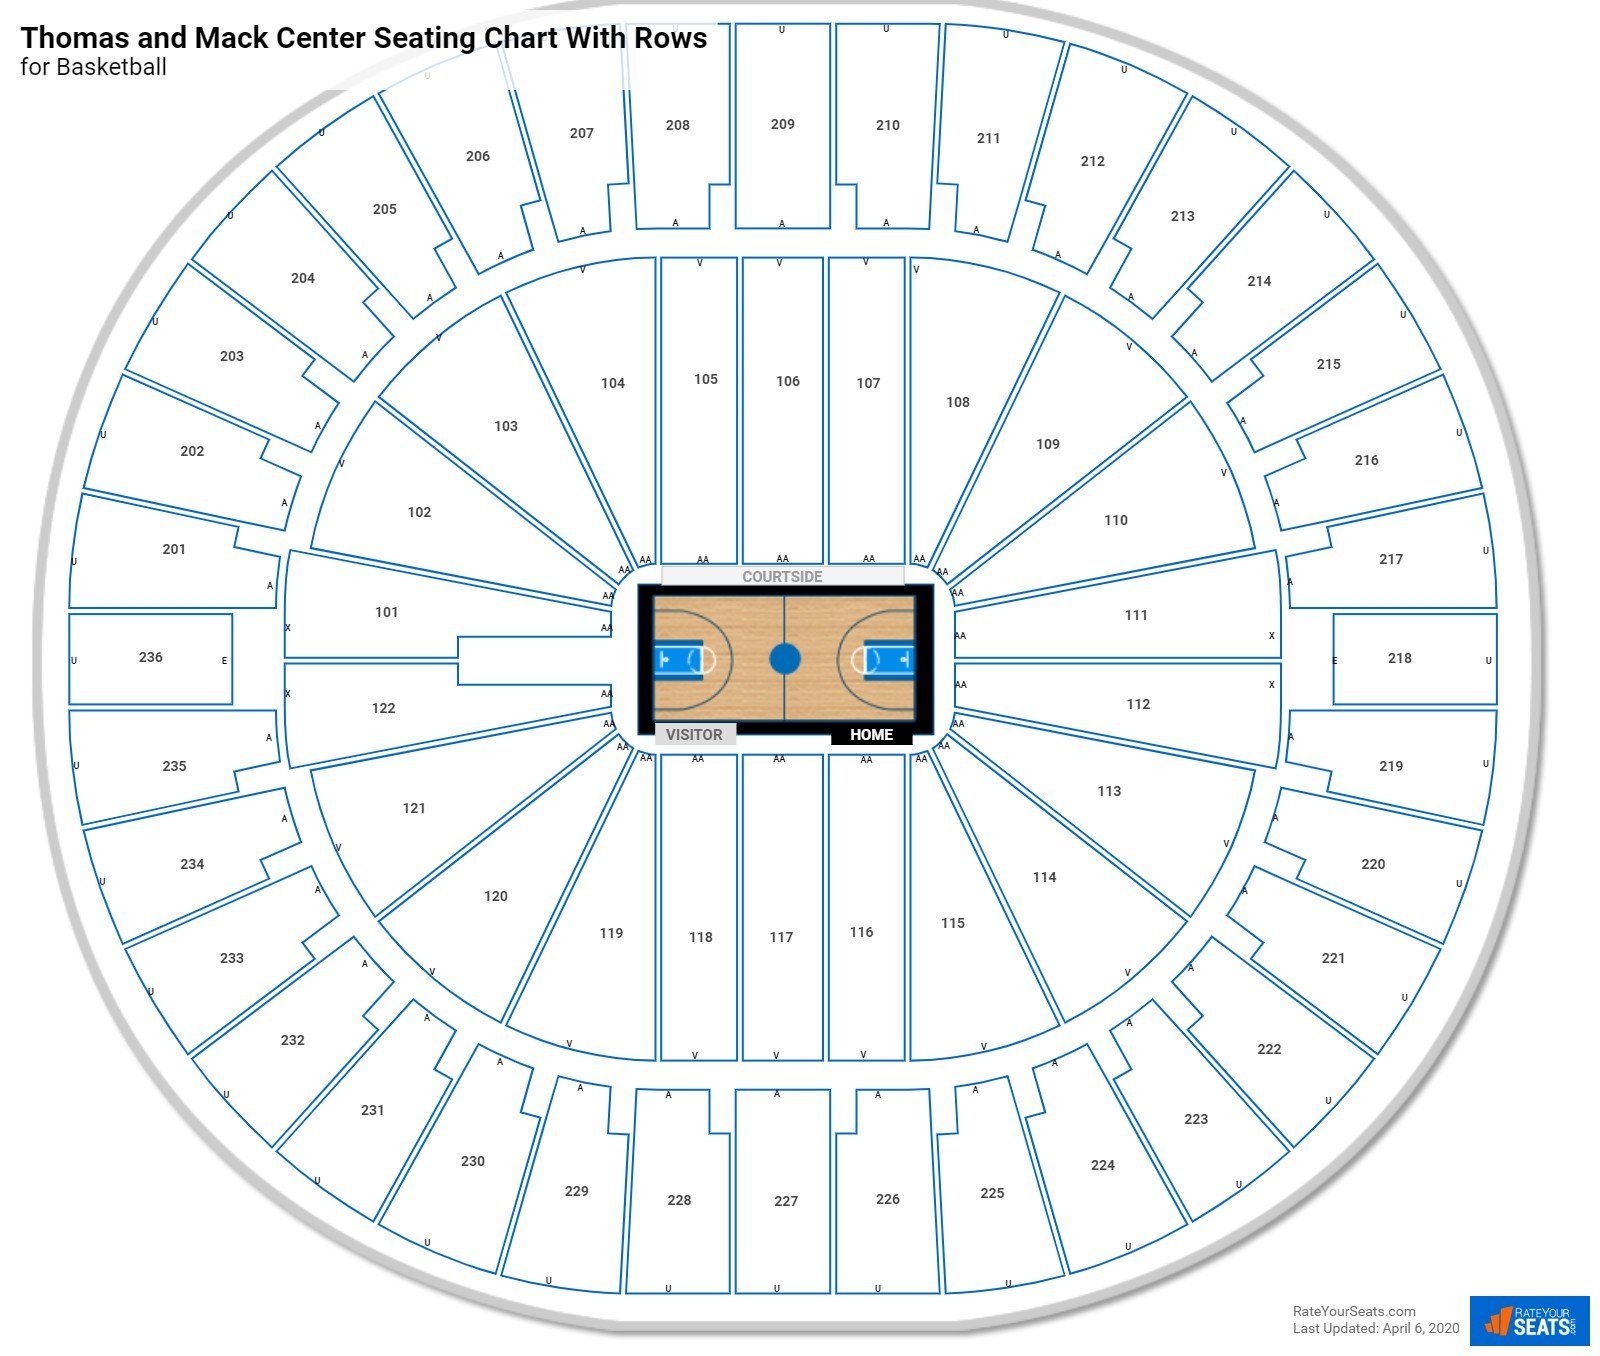 Thomas and Mack Center seating chart with row numbers